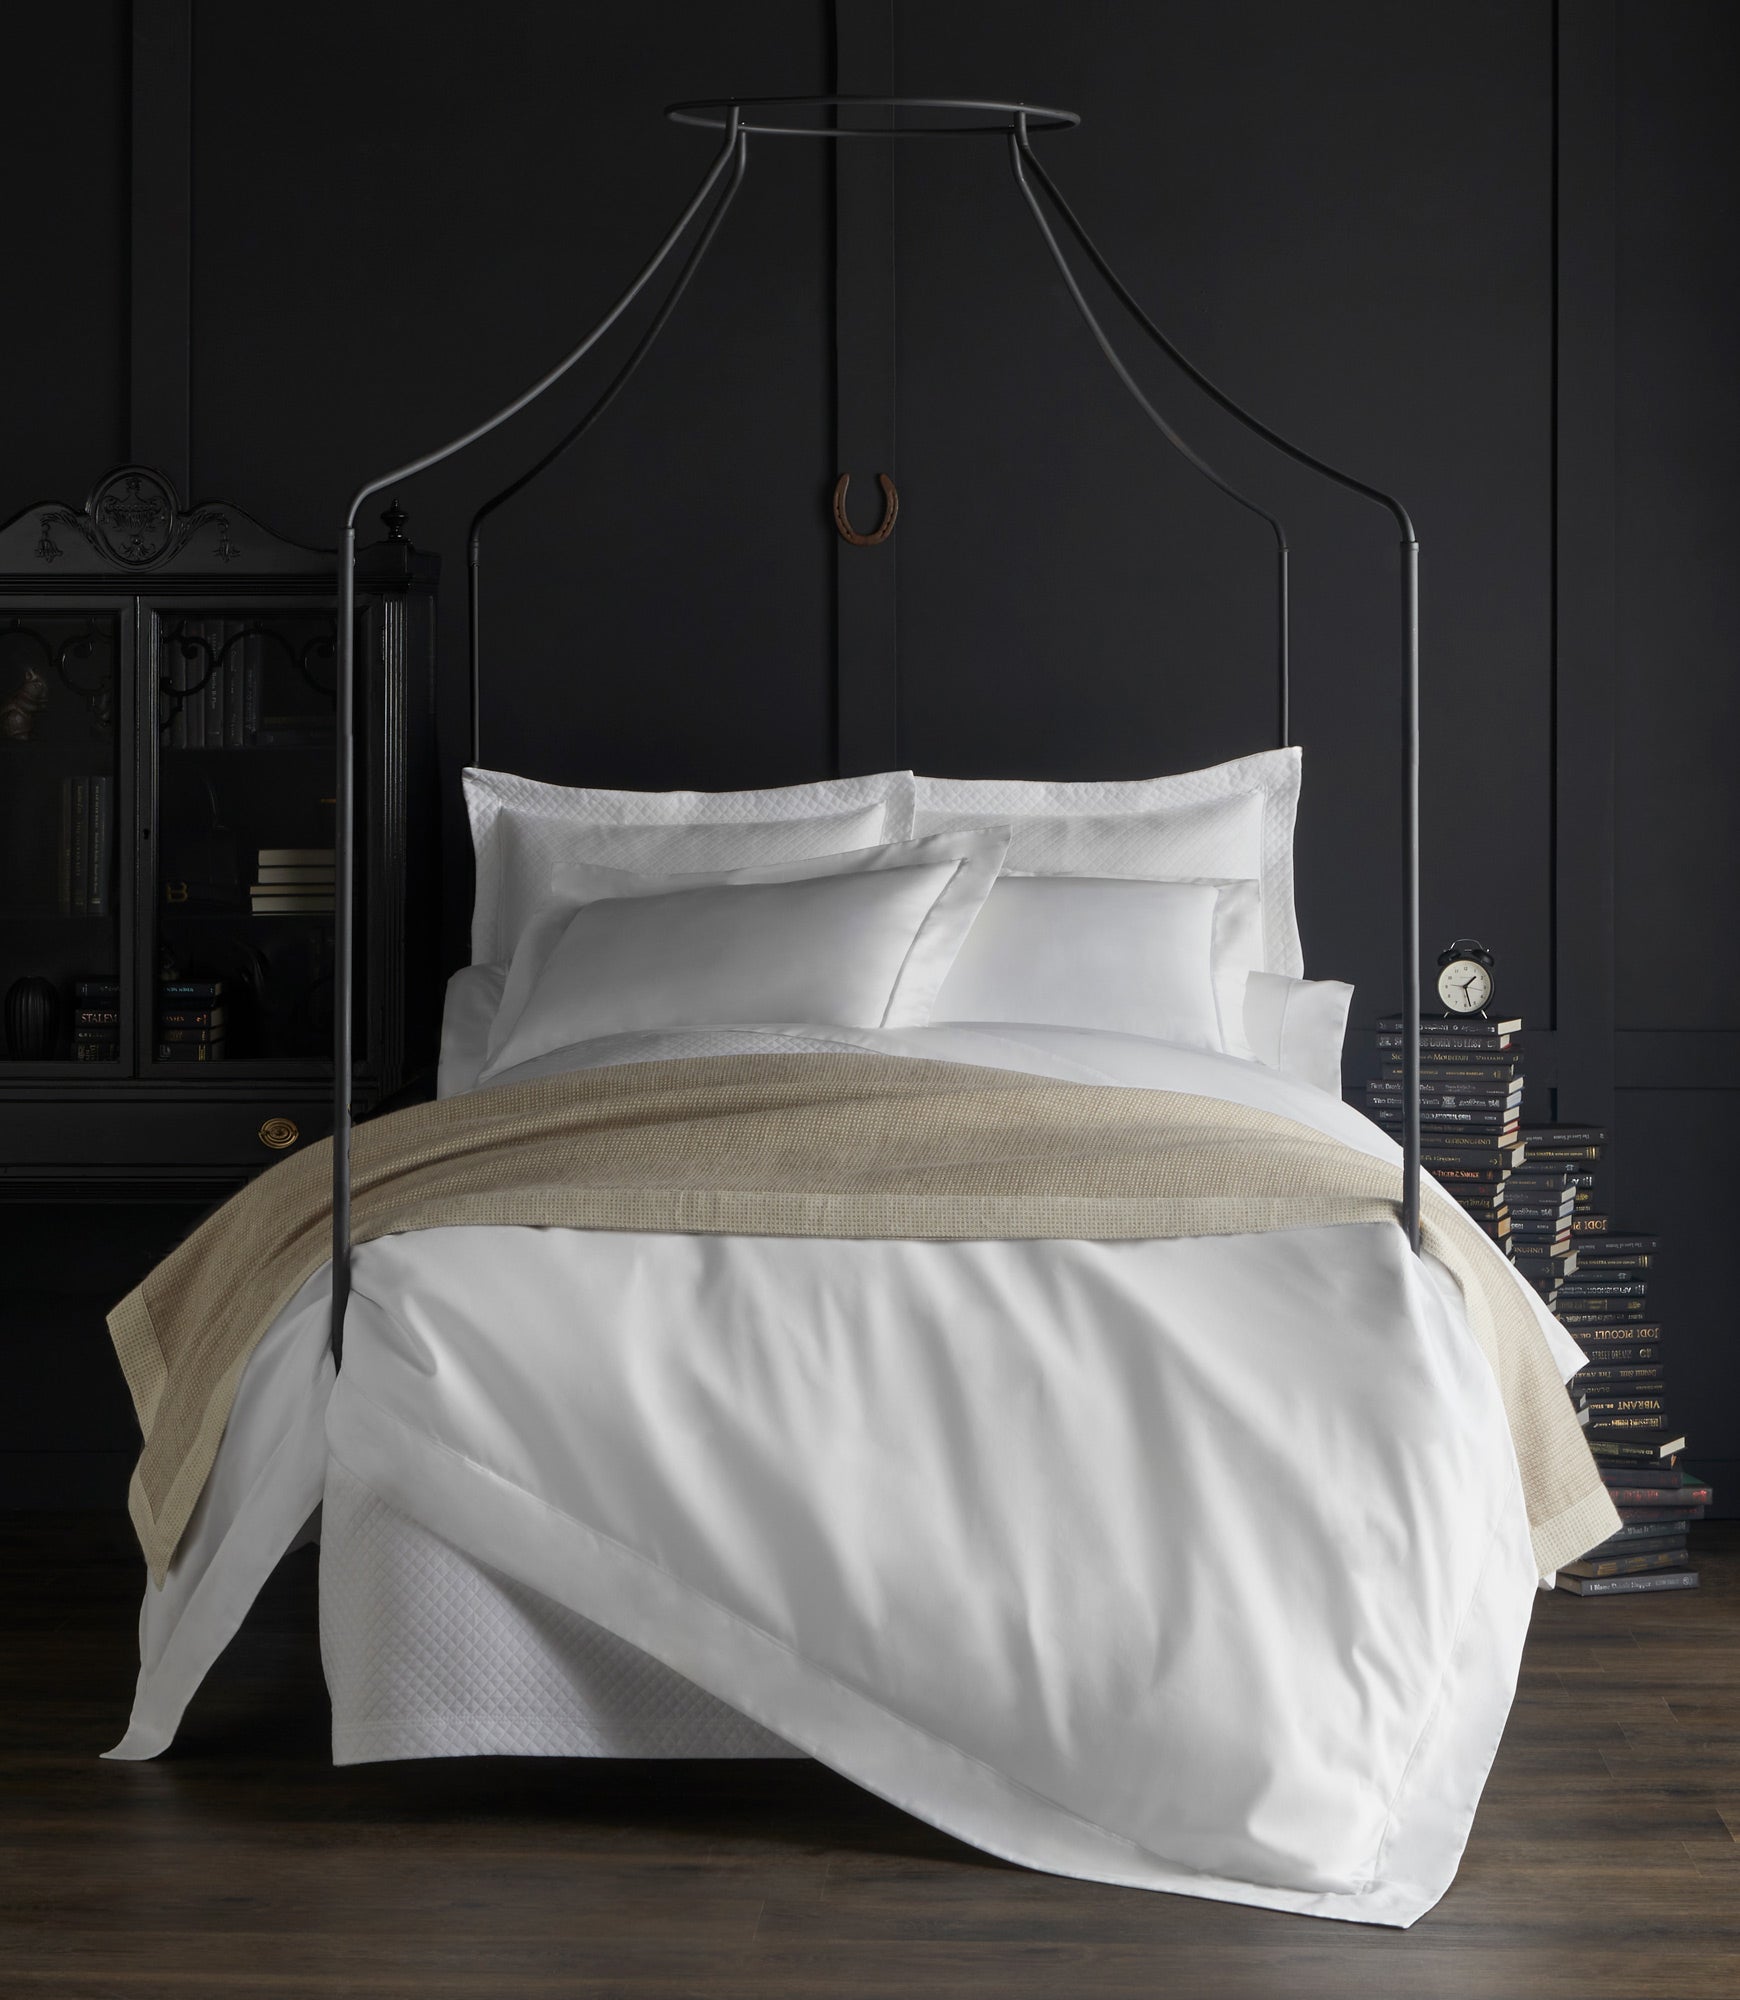 Can A Queen Size Sheets Fit a Twin Size Bed?